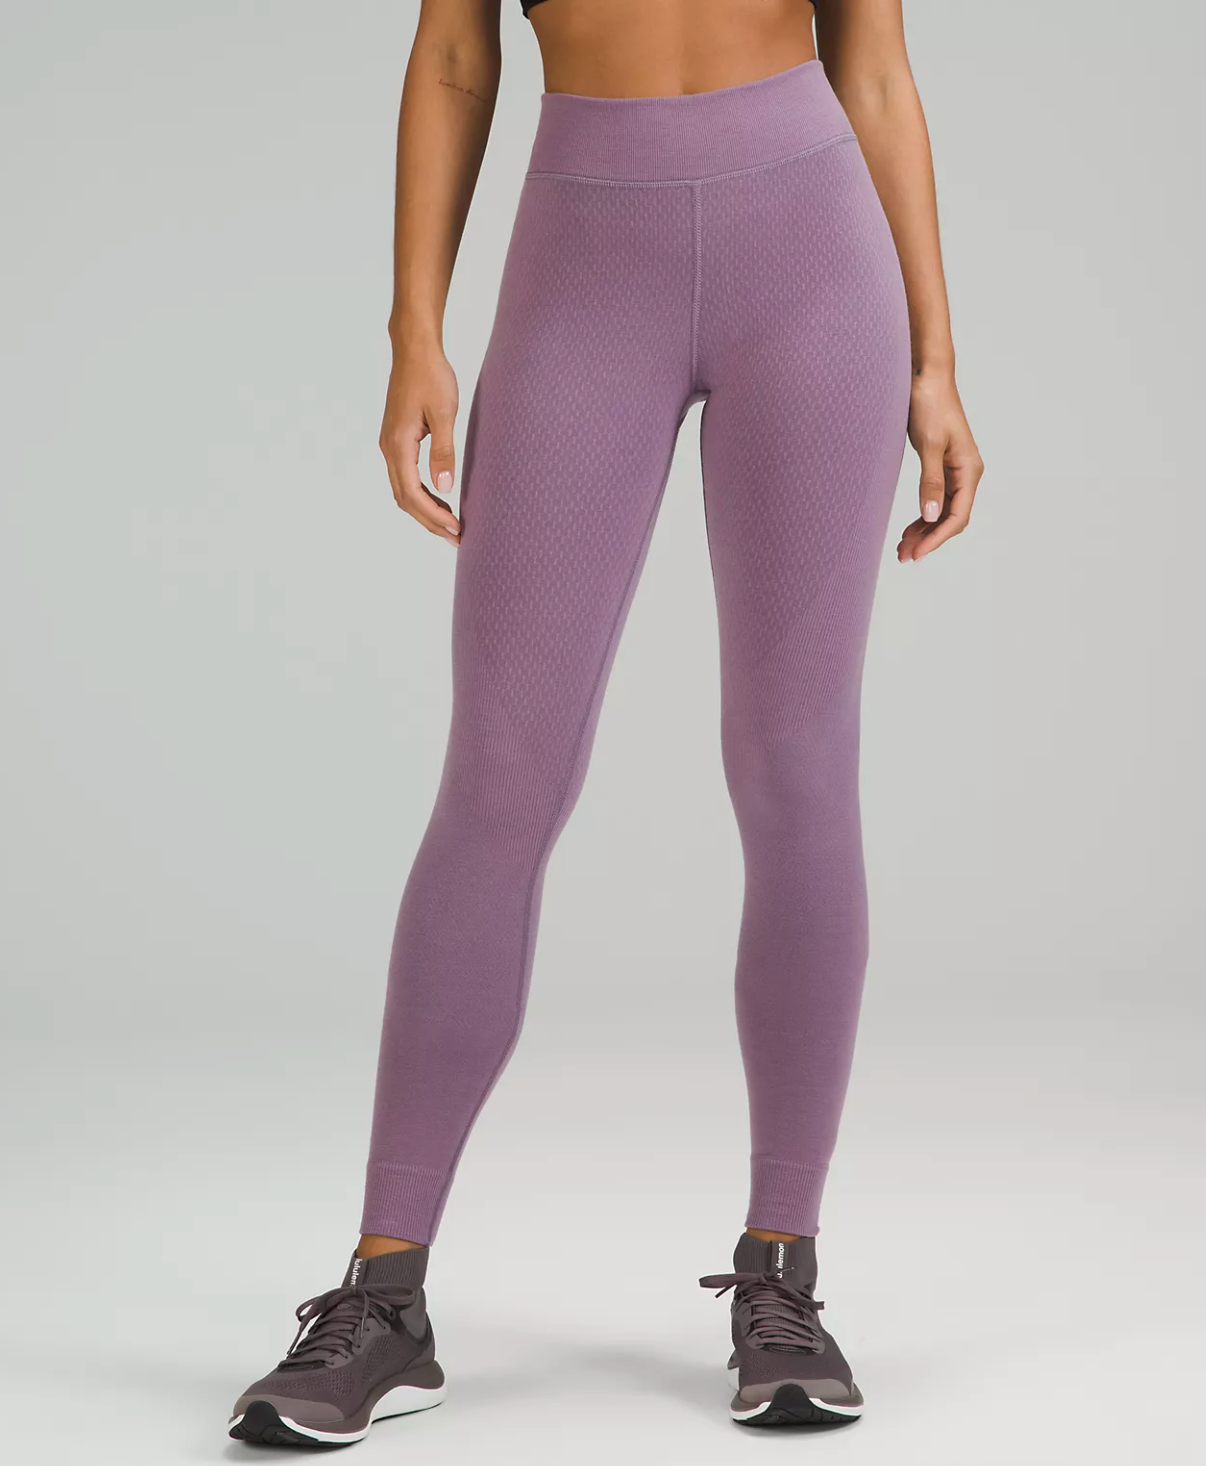 Thermal Leggings - Add an Extra Layer of Warmth with Thermal Pants